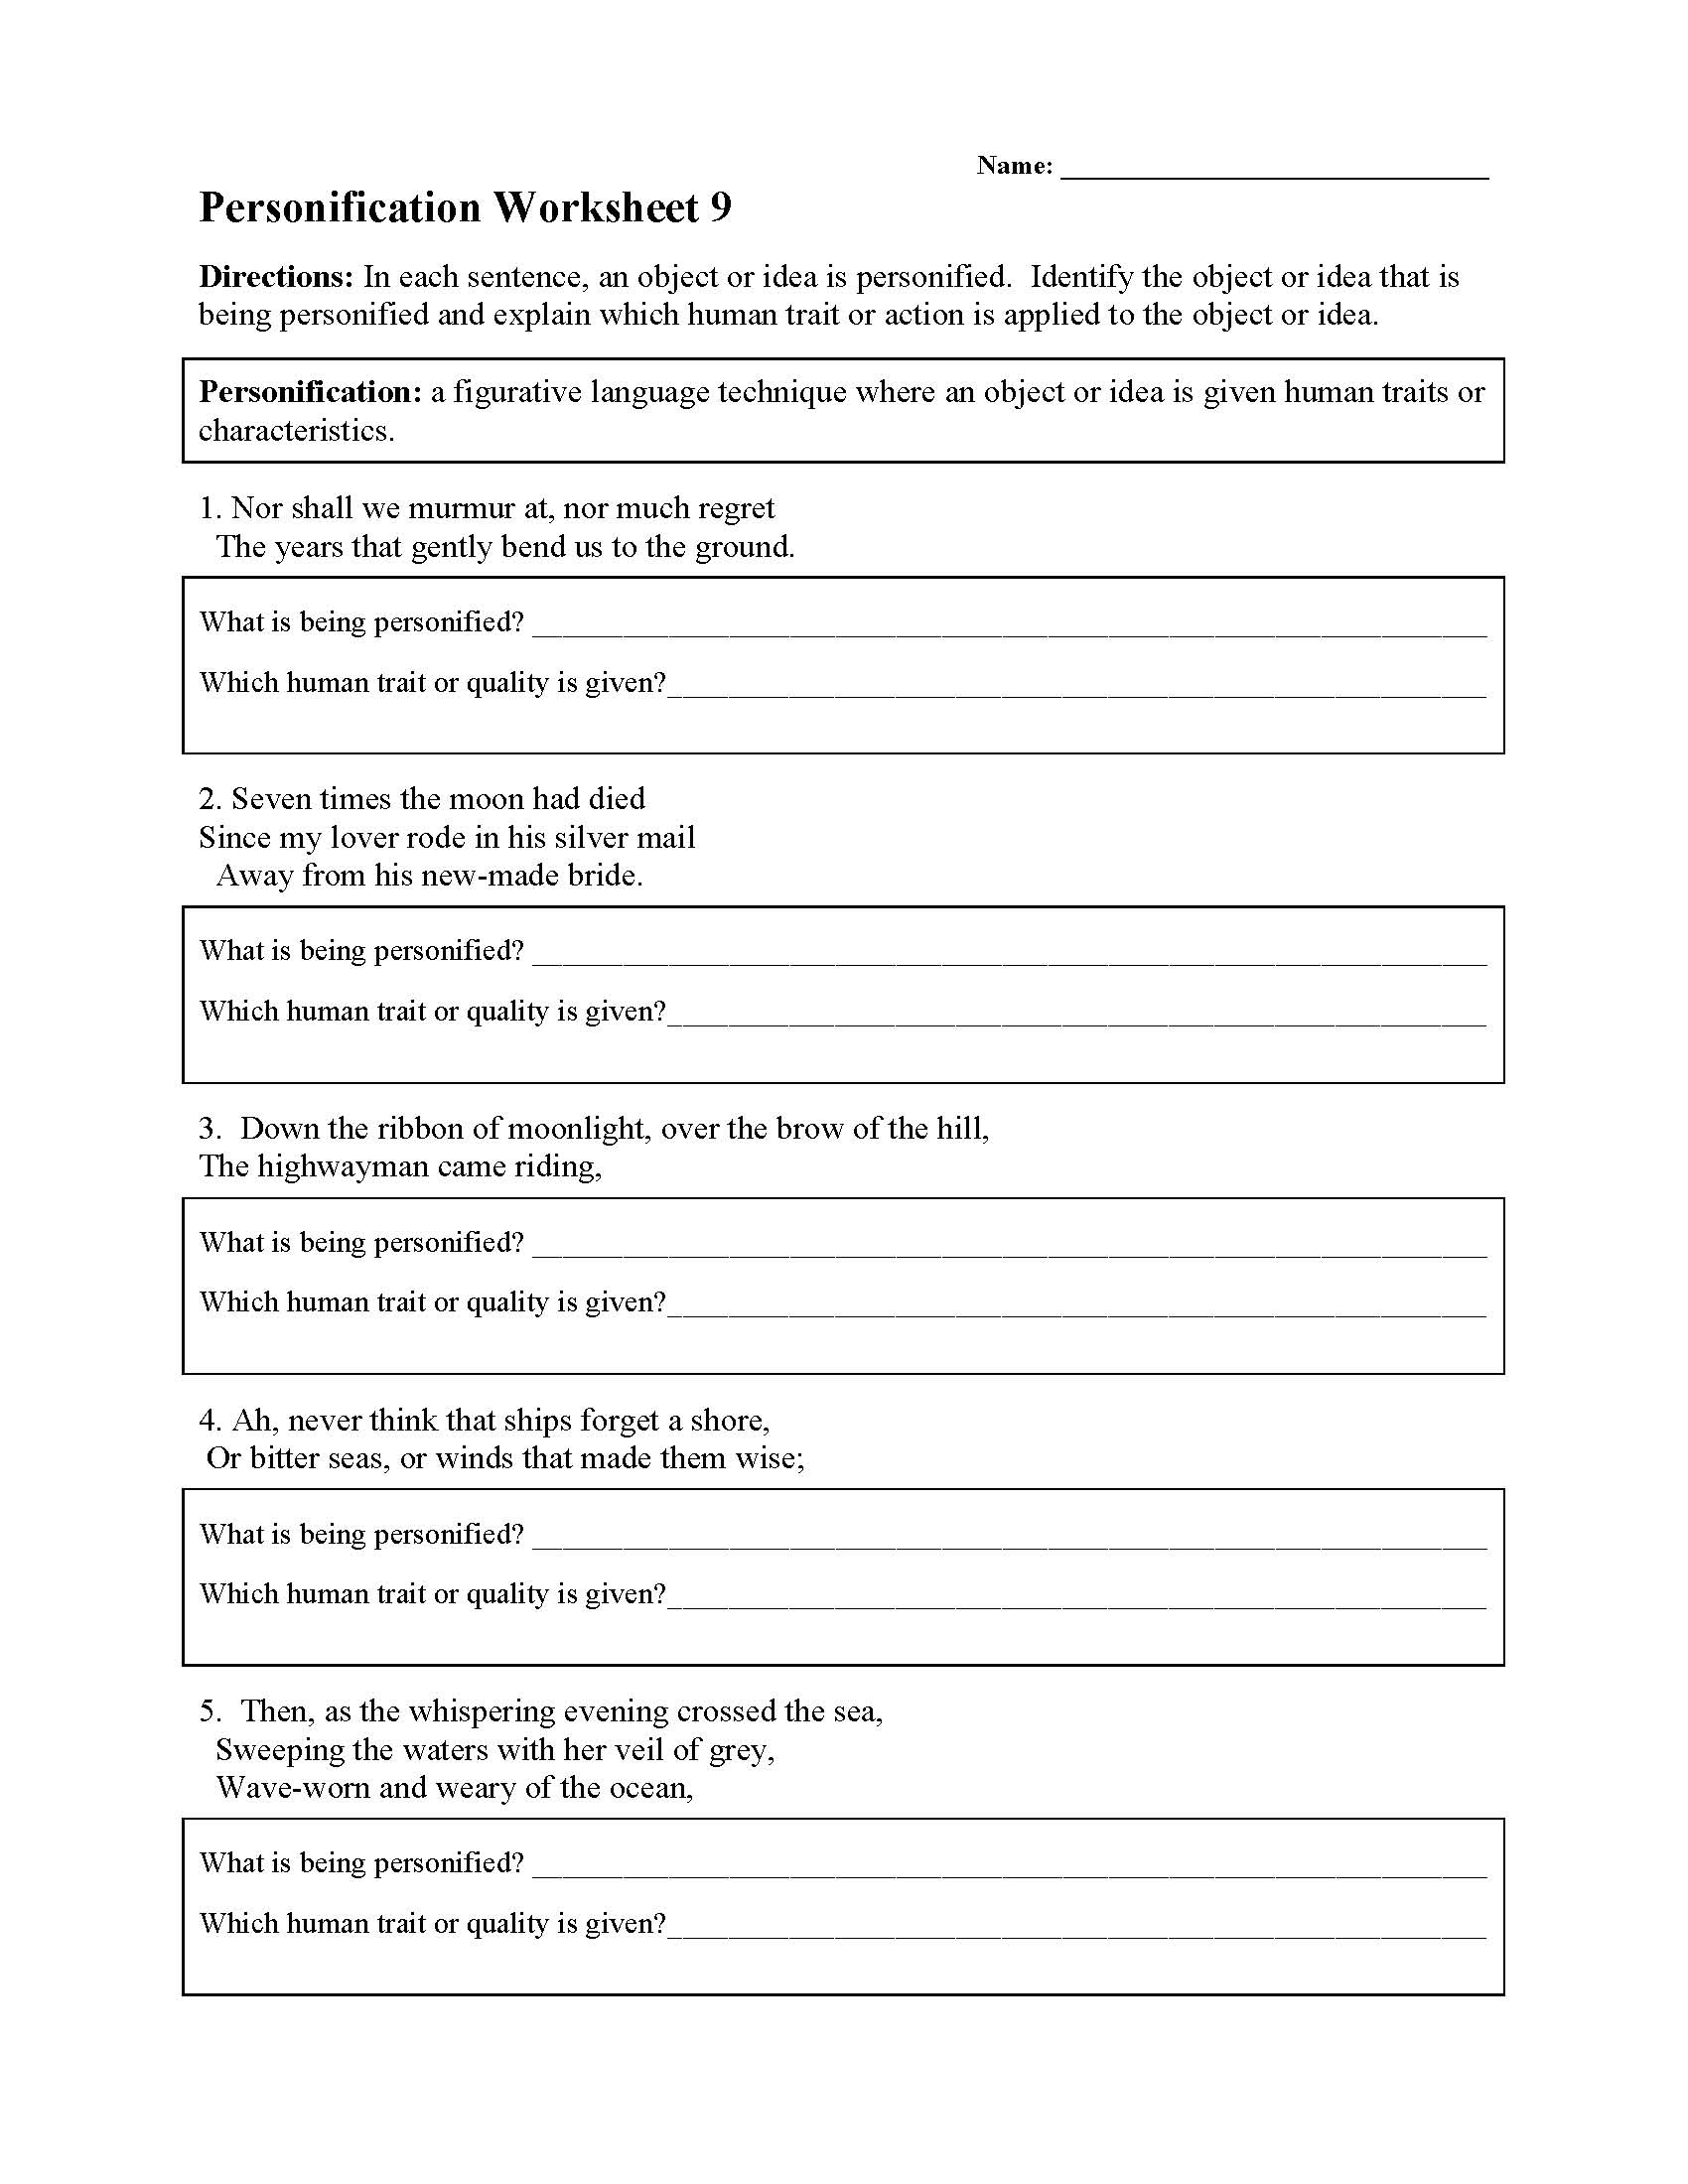 This is a preview image of Personification Worksheet 8. Click on it to enlarge it or view the source file.